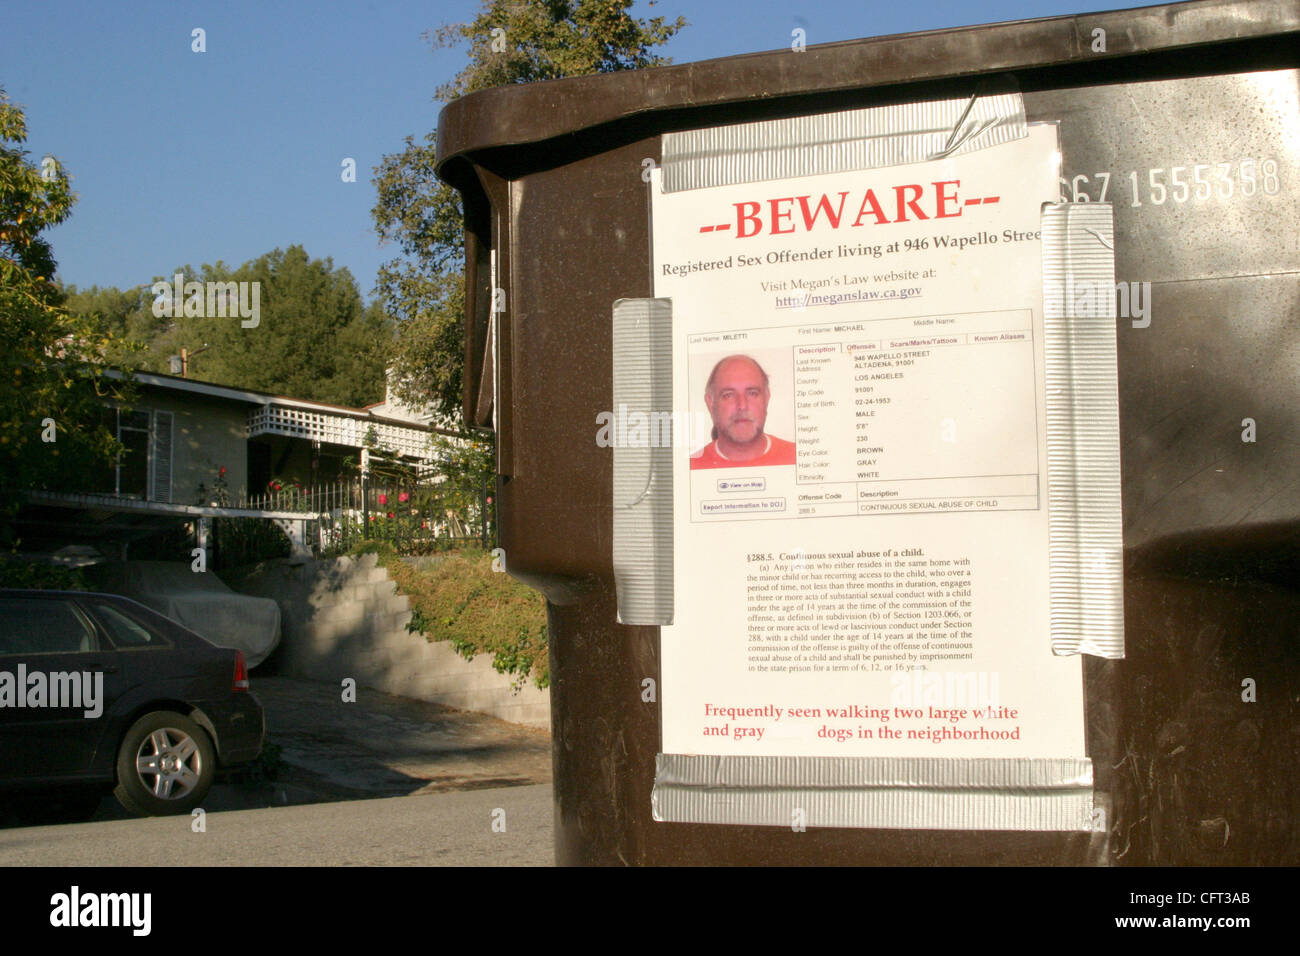 Dec 07, 2006; Altadena, CA, USA; Convicted child molester Michael Miletti's face, name and address appear on posters lining Wapello Street in Altadena, with the admonishment: 'Leave Our Neighborhood Now Child Molester.' Up since May, the signs are staked into lawns, taped to trash cans and nailed to Stock Photo